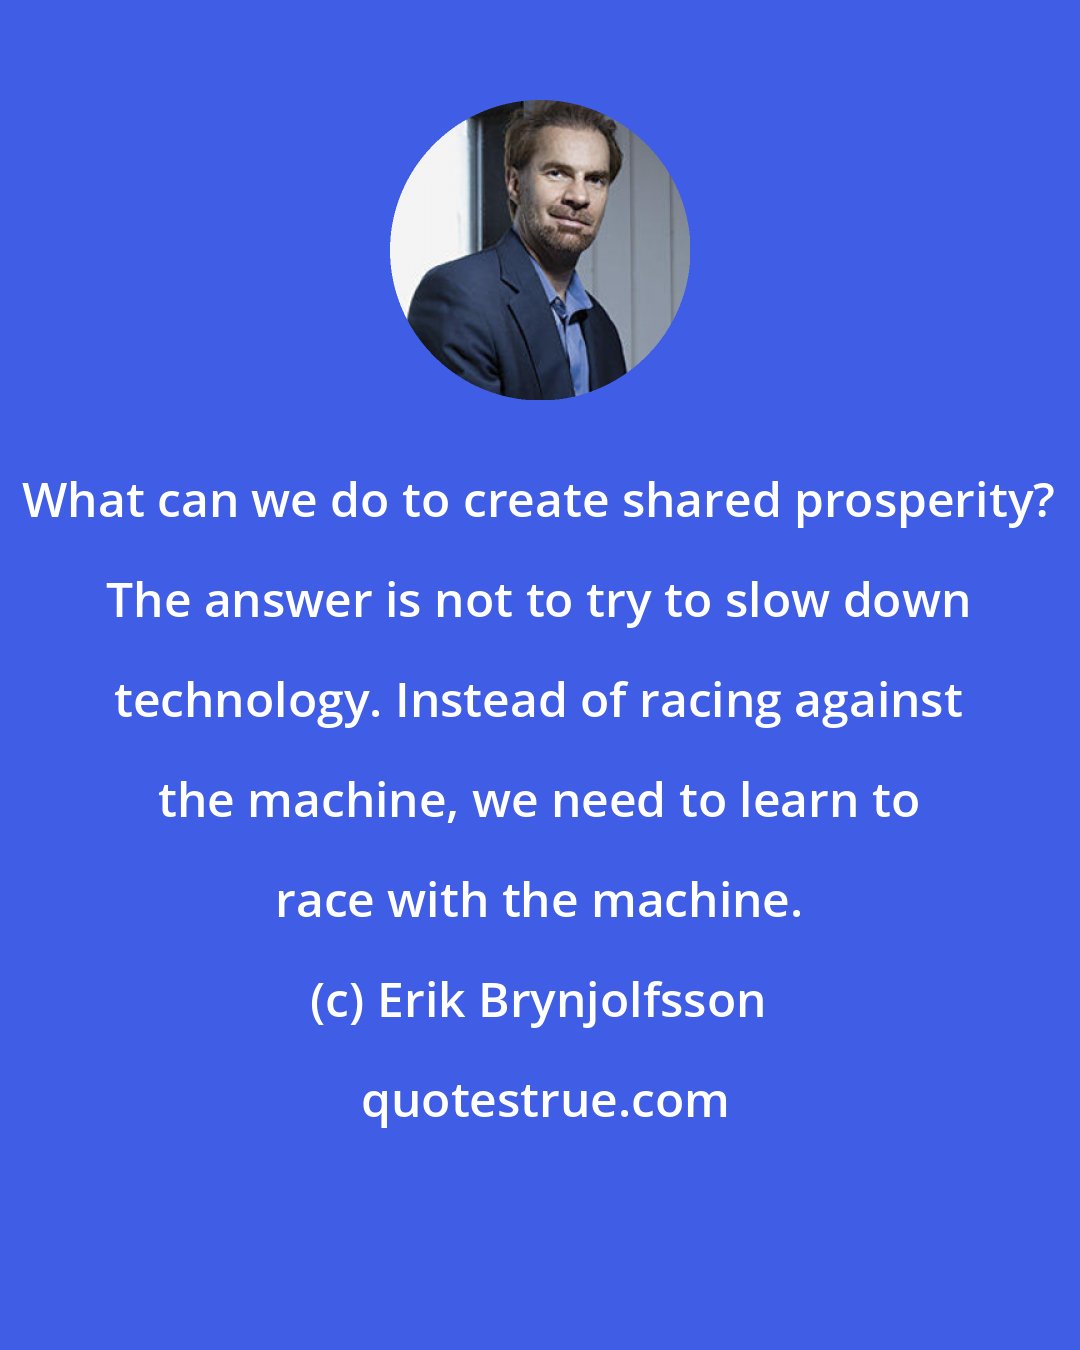 Erik Brynjolfsson: What can we do to create shared prosperity? The answer is not to try to slow down technology. Instead of racing against the machine, we need to learn to race with the machine.